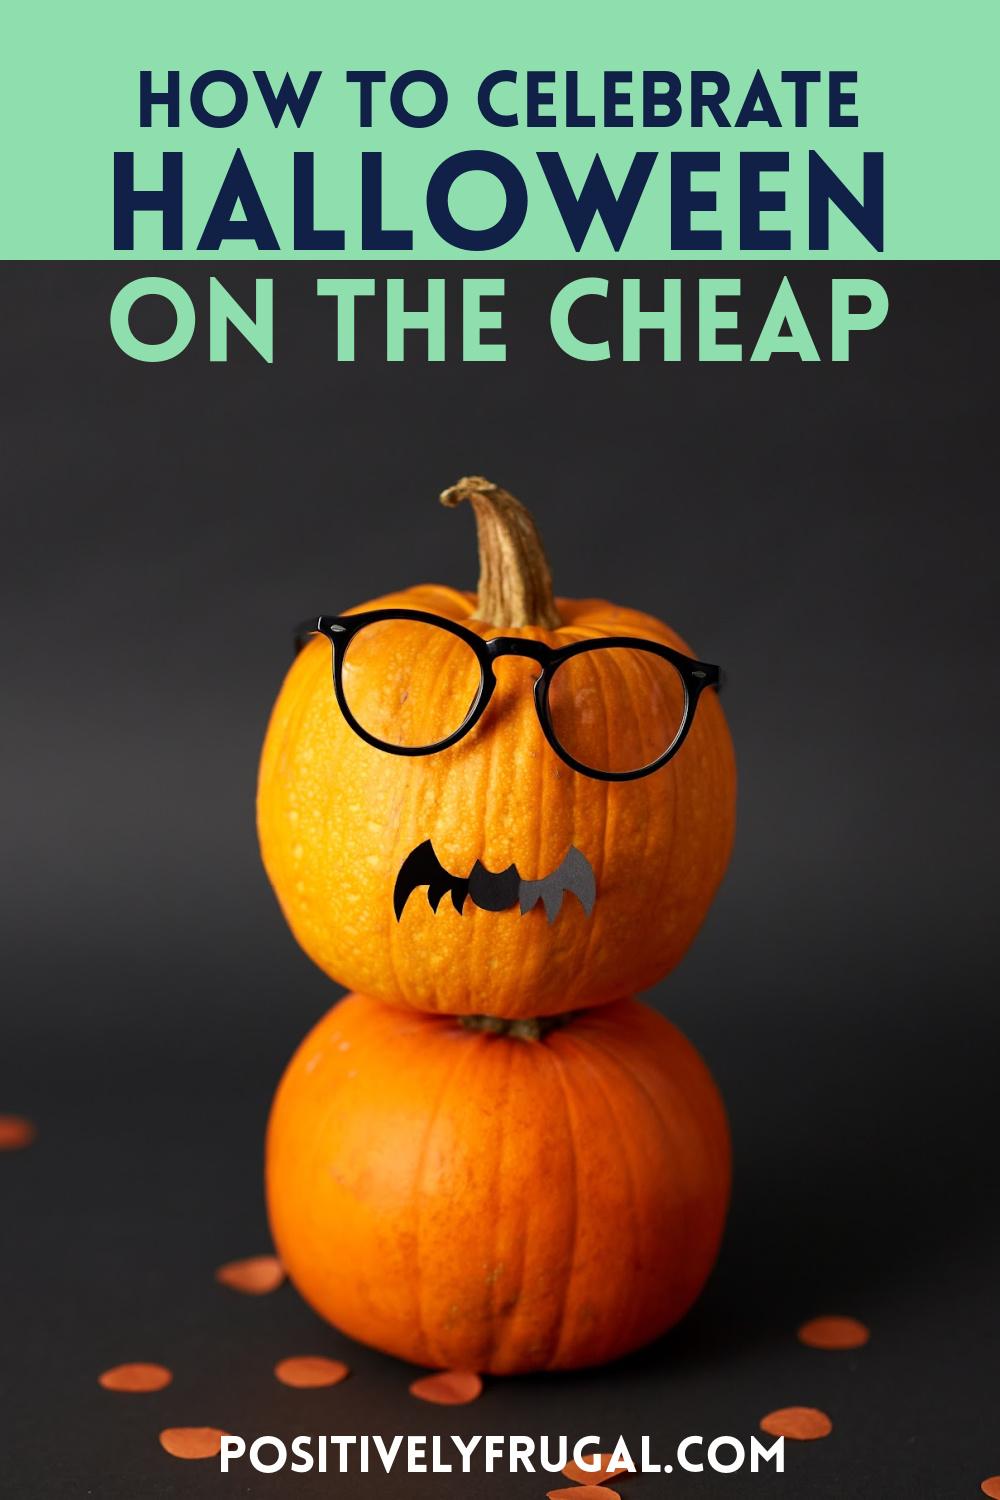 Halloween on the Cheap by PositivelyFrugal.com